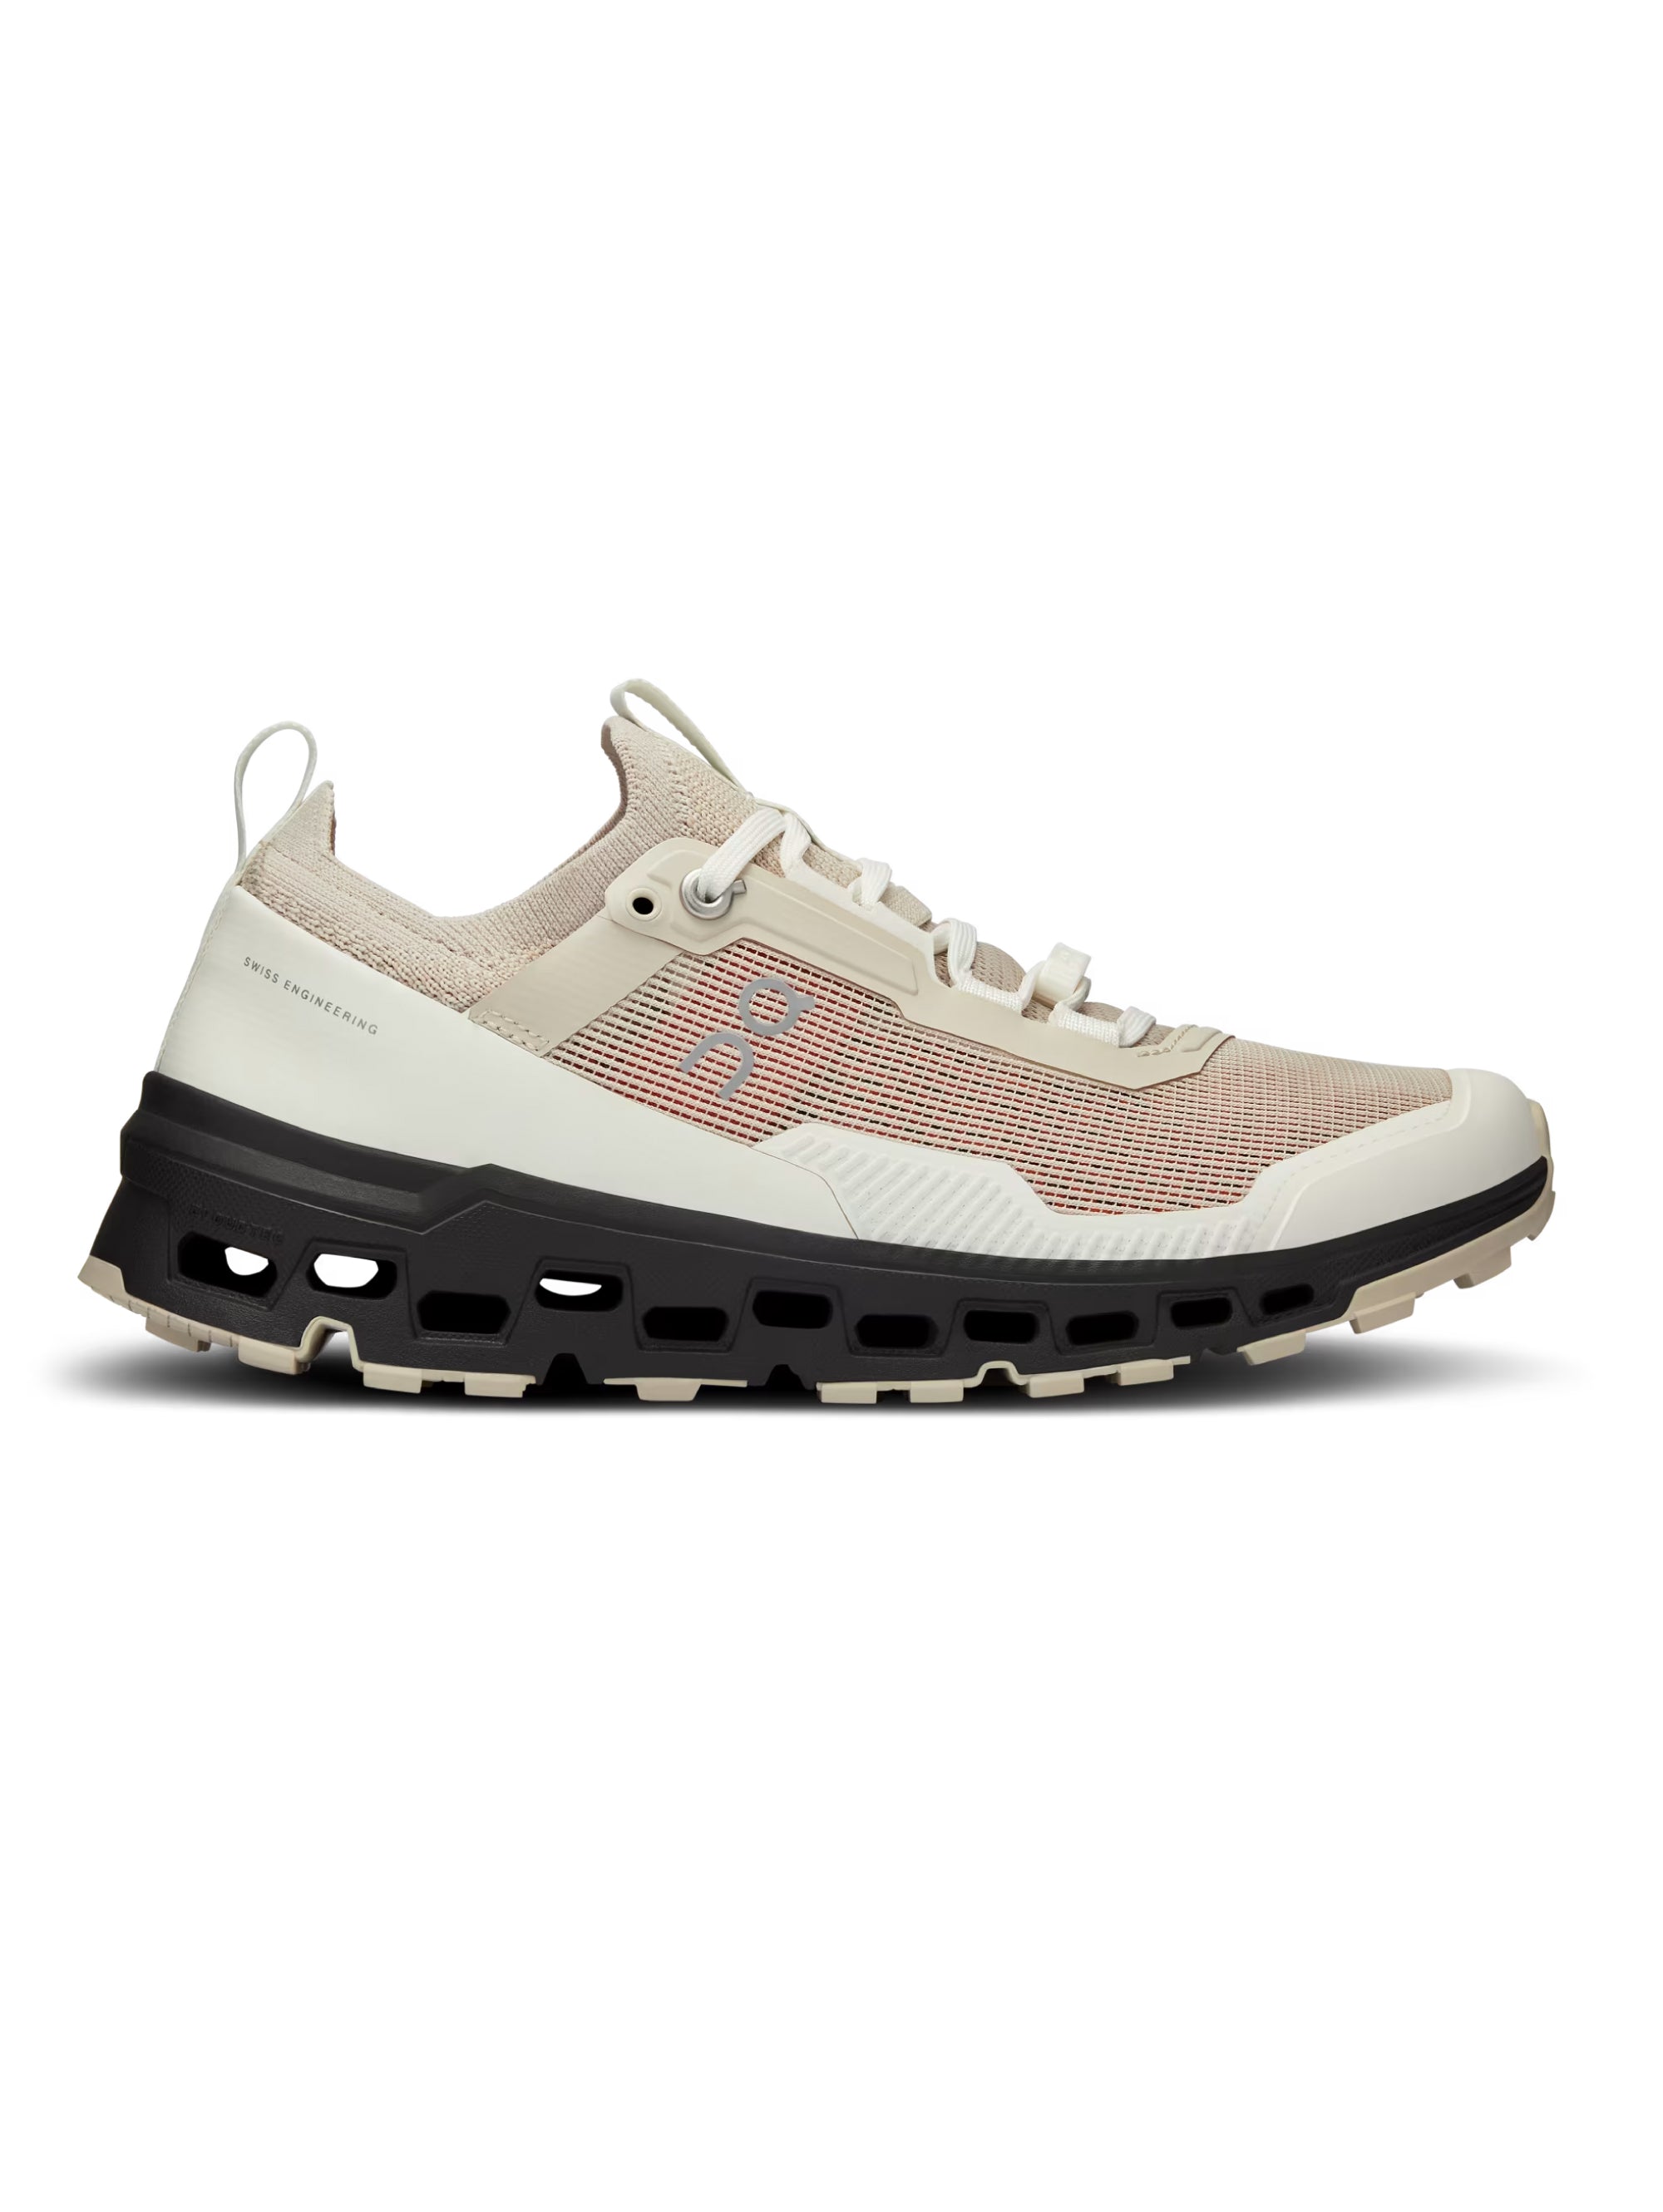 Cloudultra 2 Trail Sneakers Sand Black